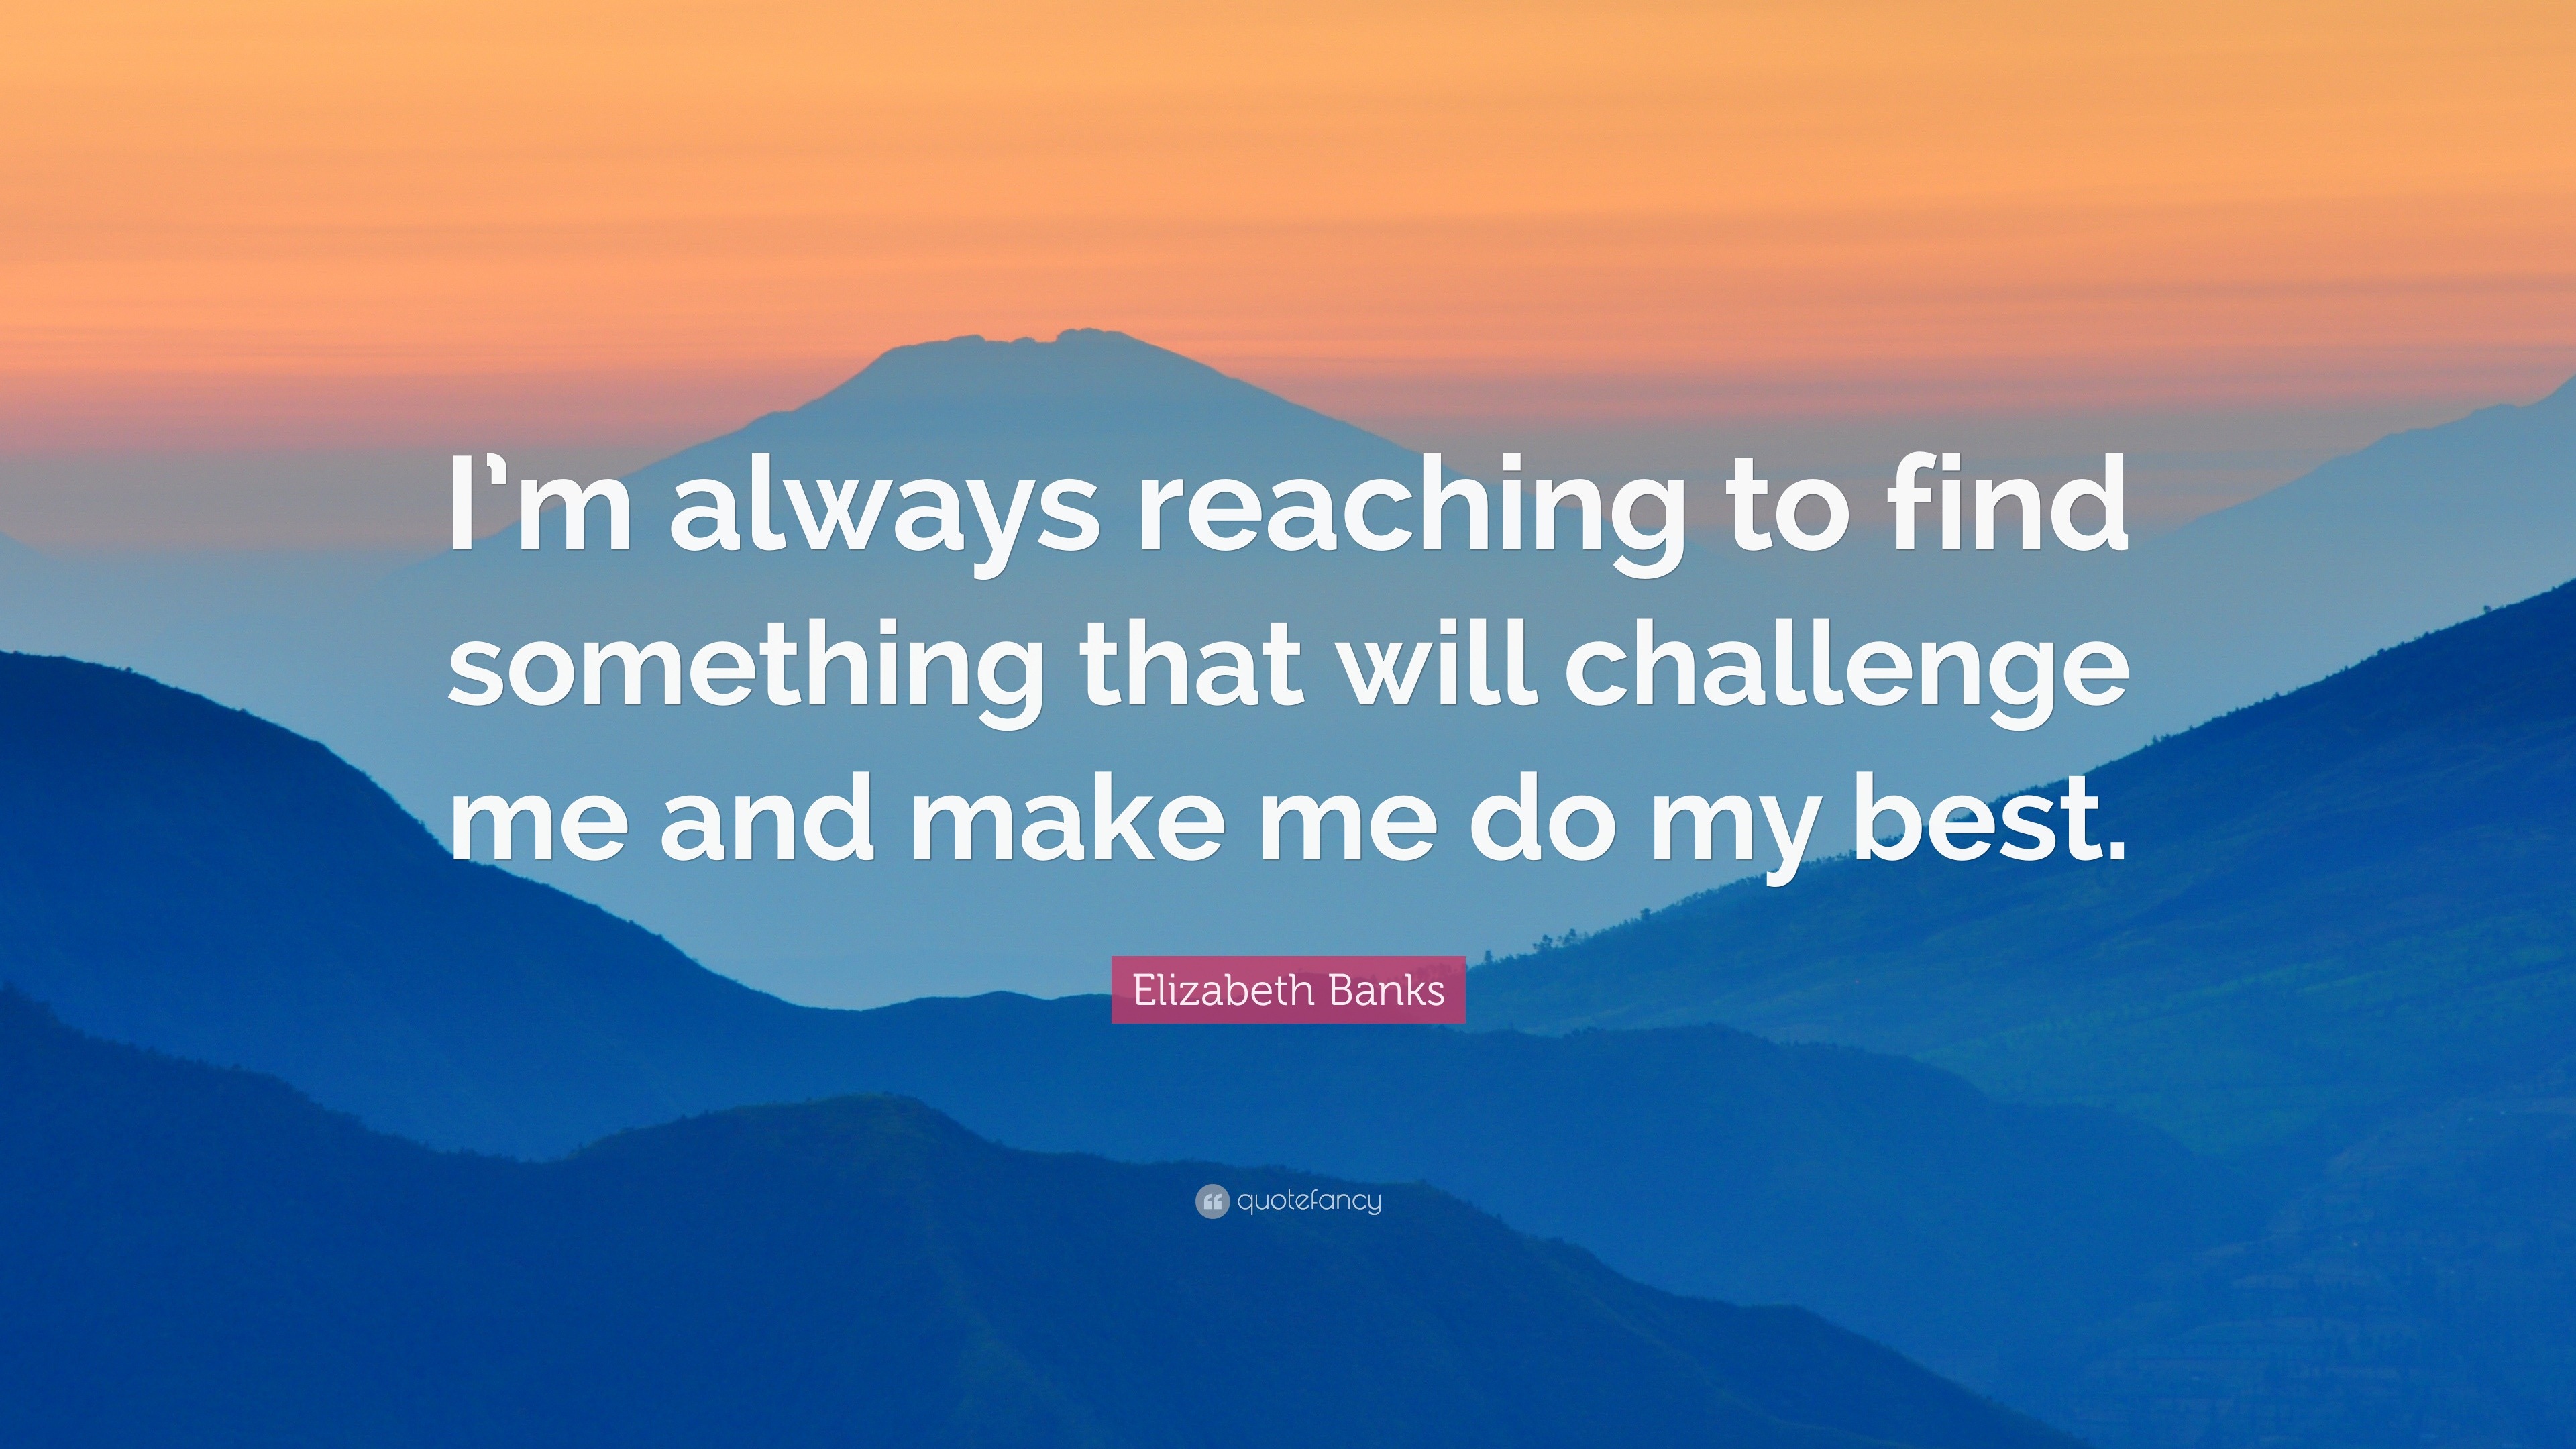 Elizabeth Banks Quote: “I’m always reaching to find something that will ...